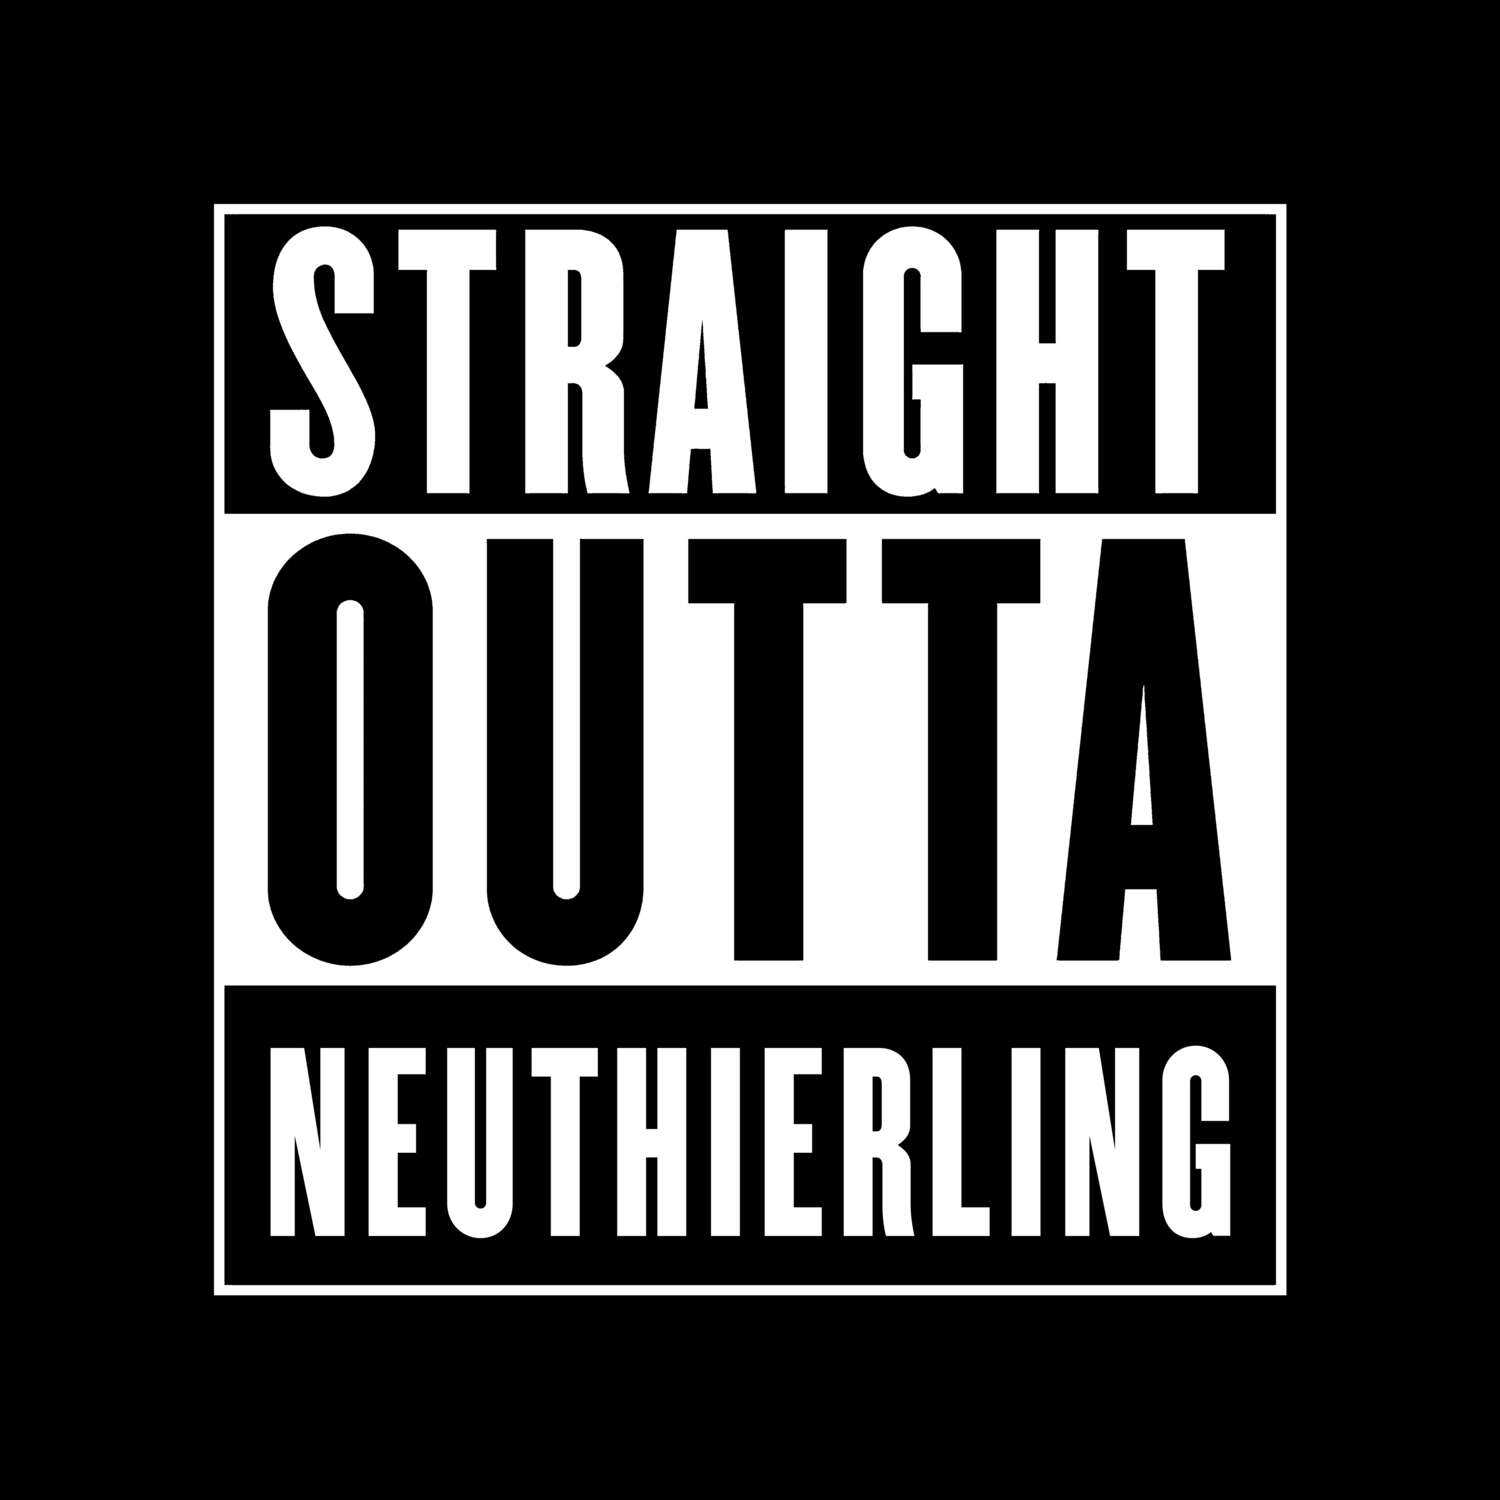 Neuthierling T-Shirt »Straight Outta«